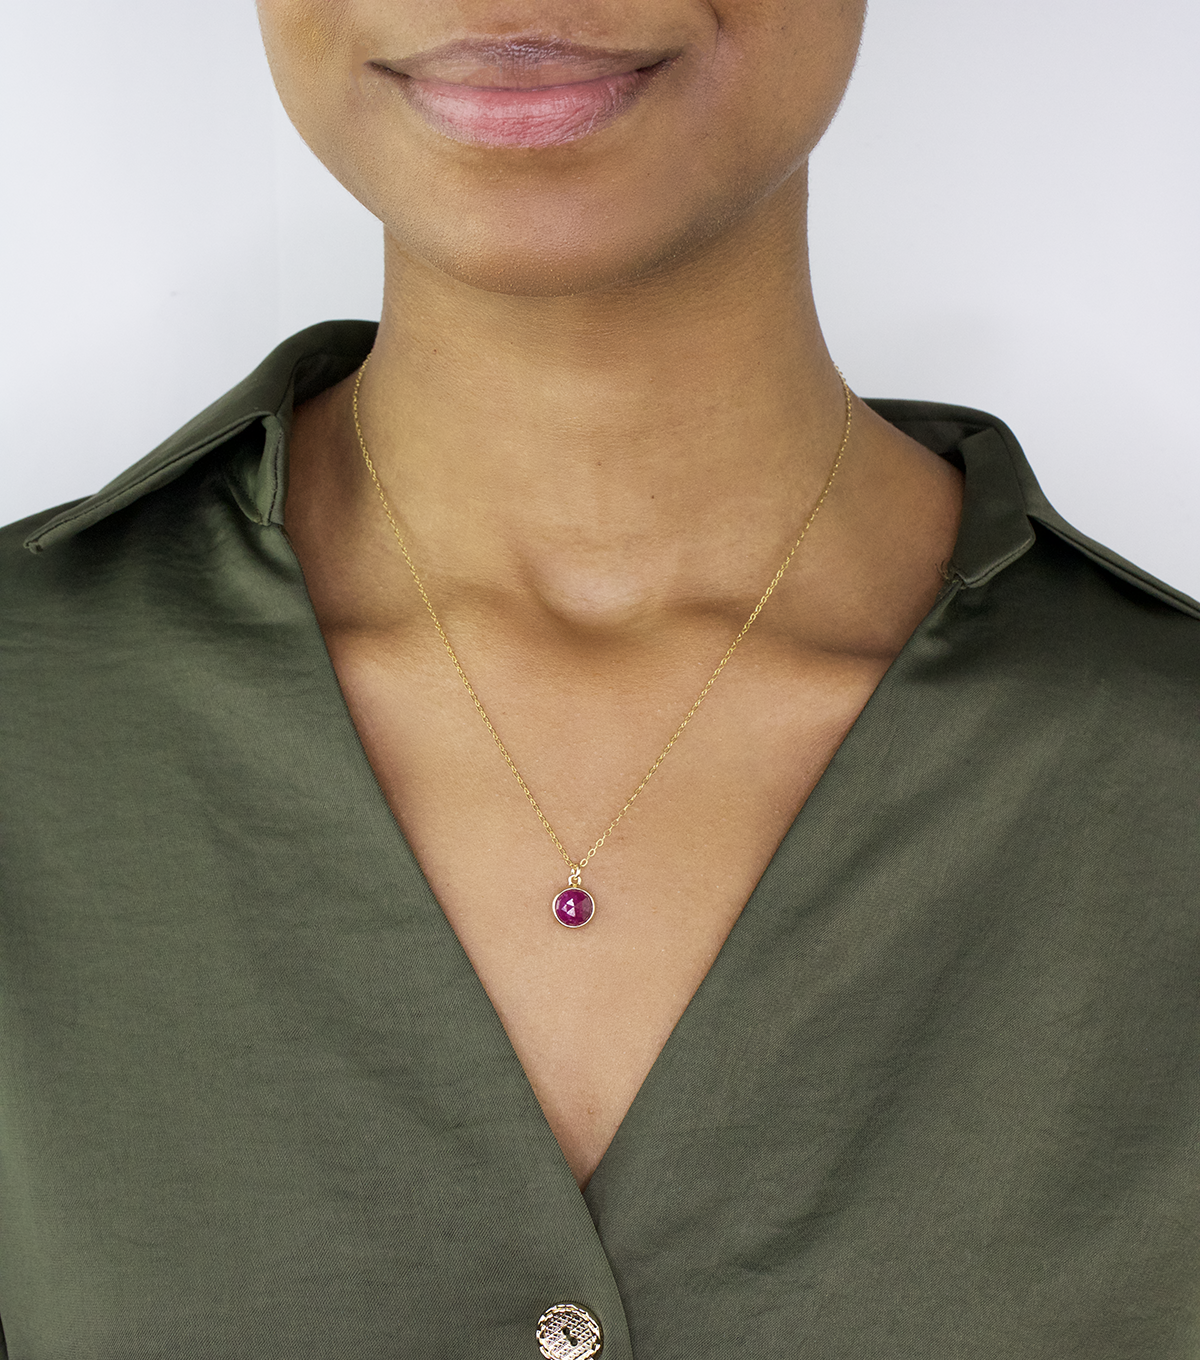 Ruby Sun Necklace | Ruby and Gold